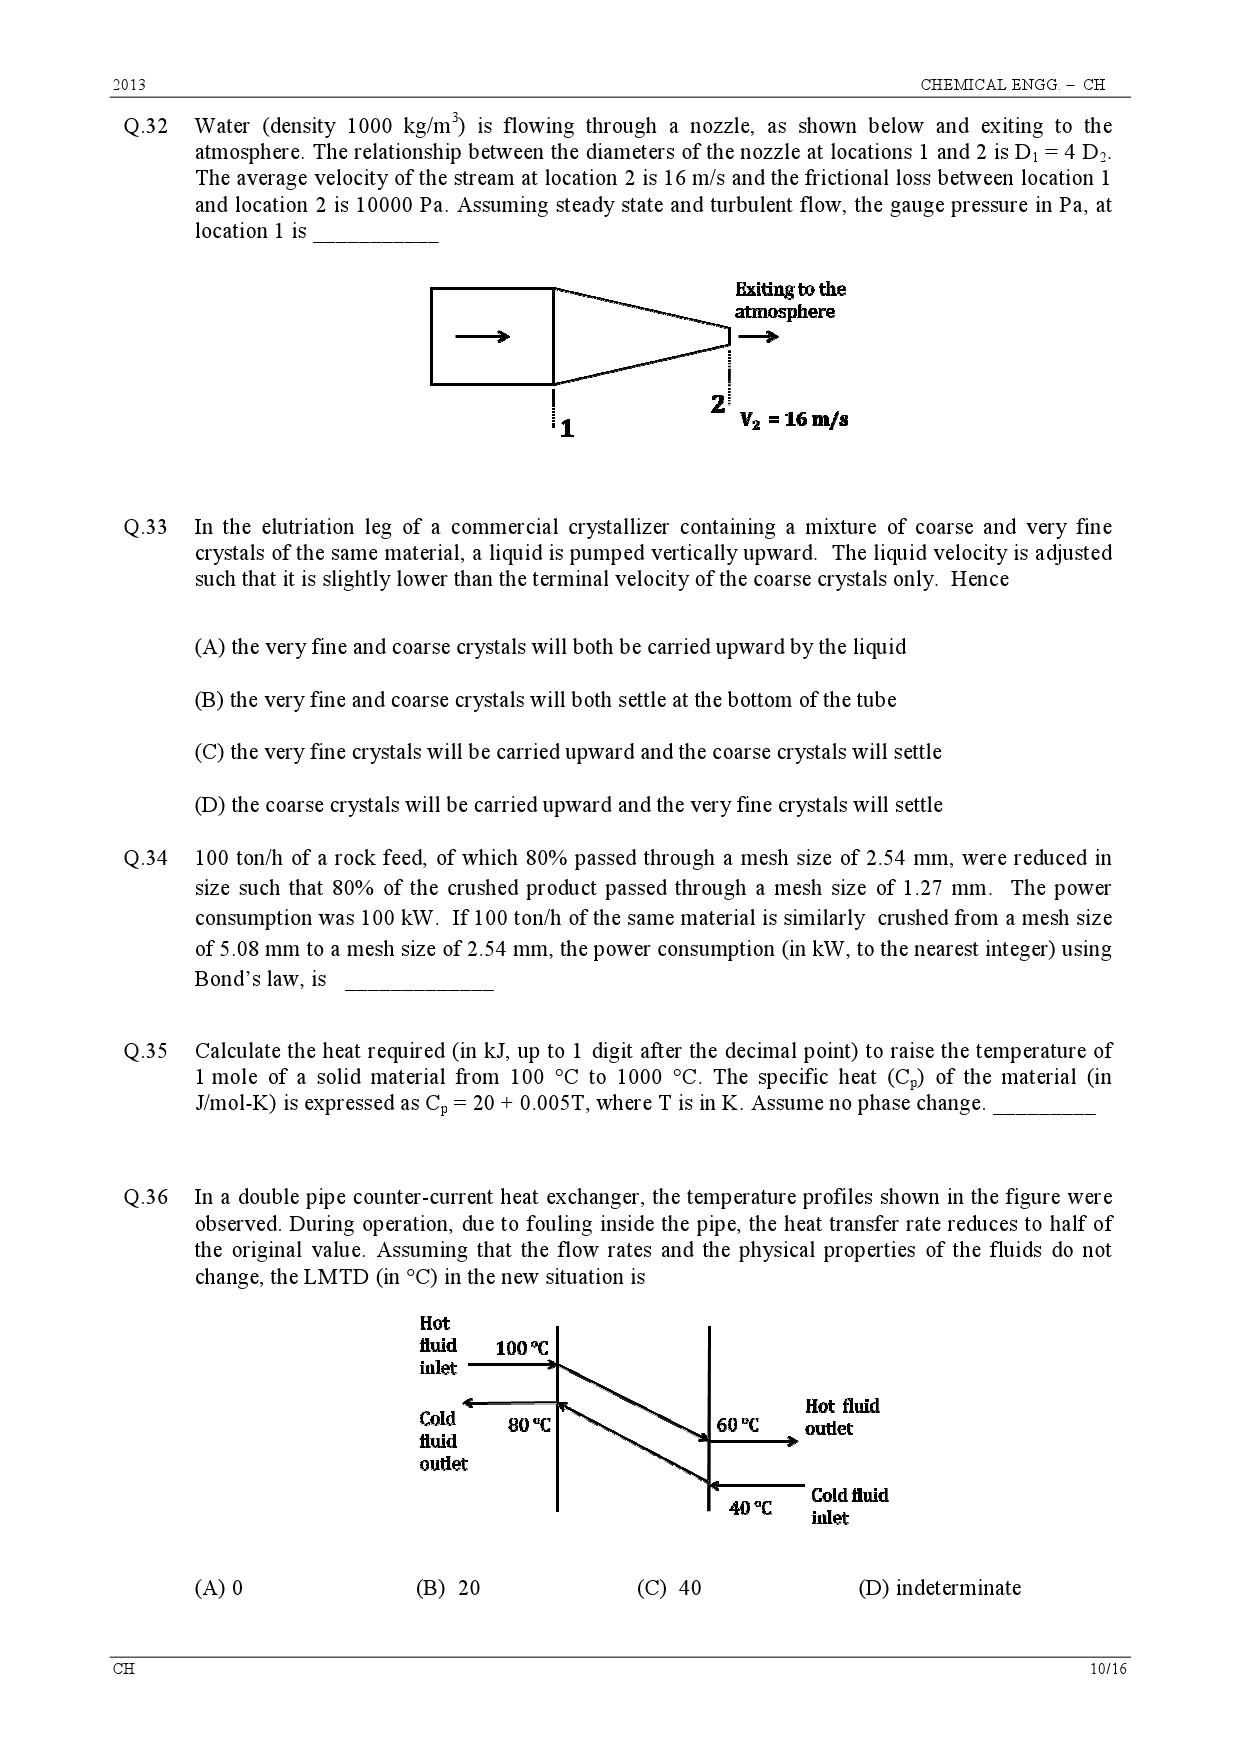 GATE Exam Question Paper 2013 Chemical Engineering 10